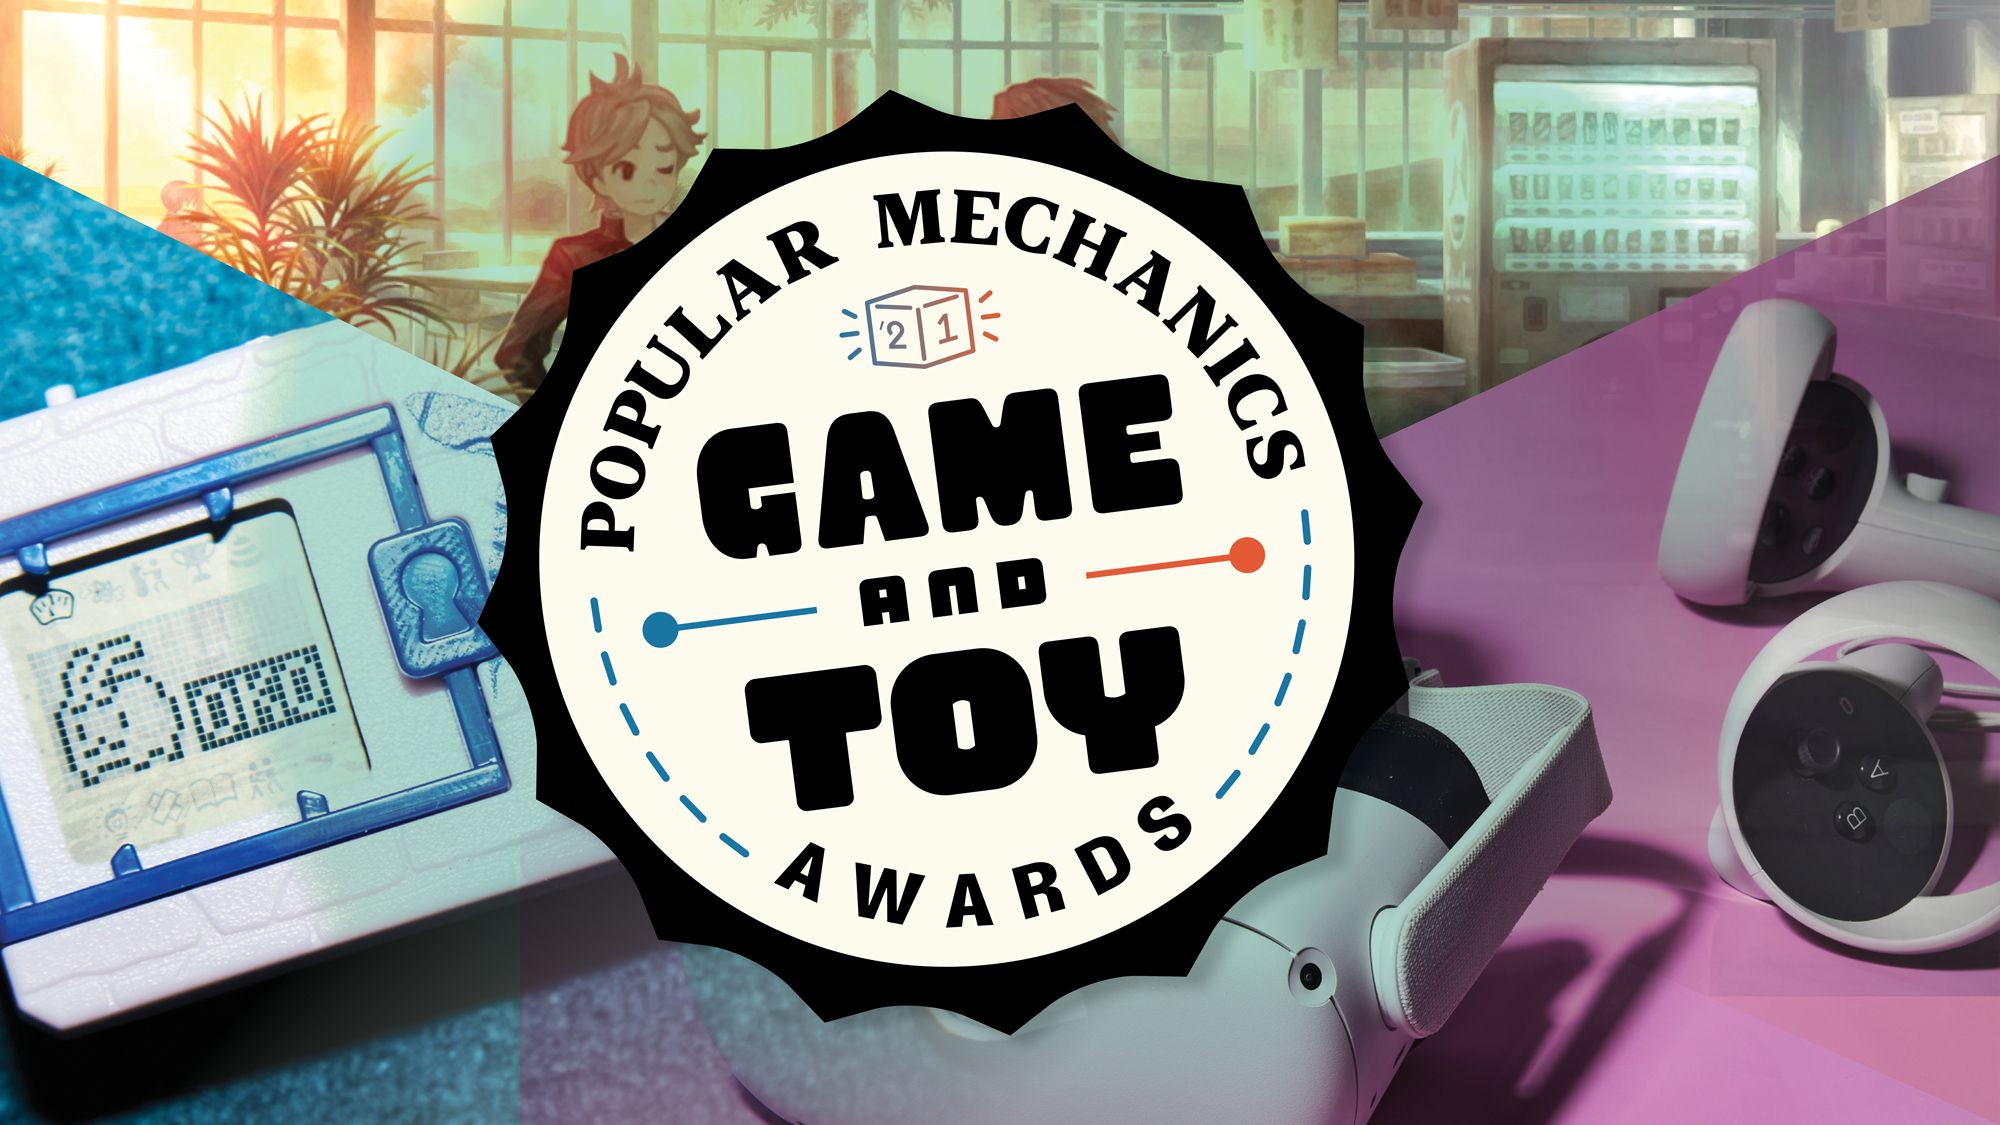 Bandai America Selected as Finalist for Two 2021 Toy of the Year Awards!